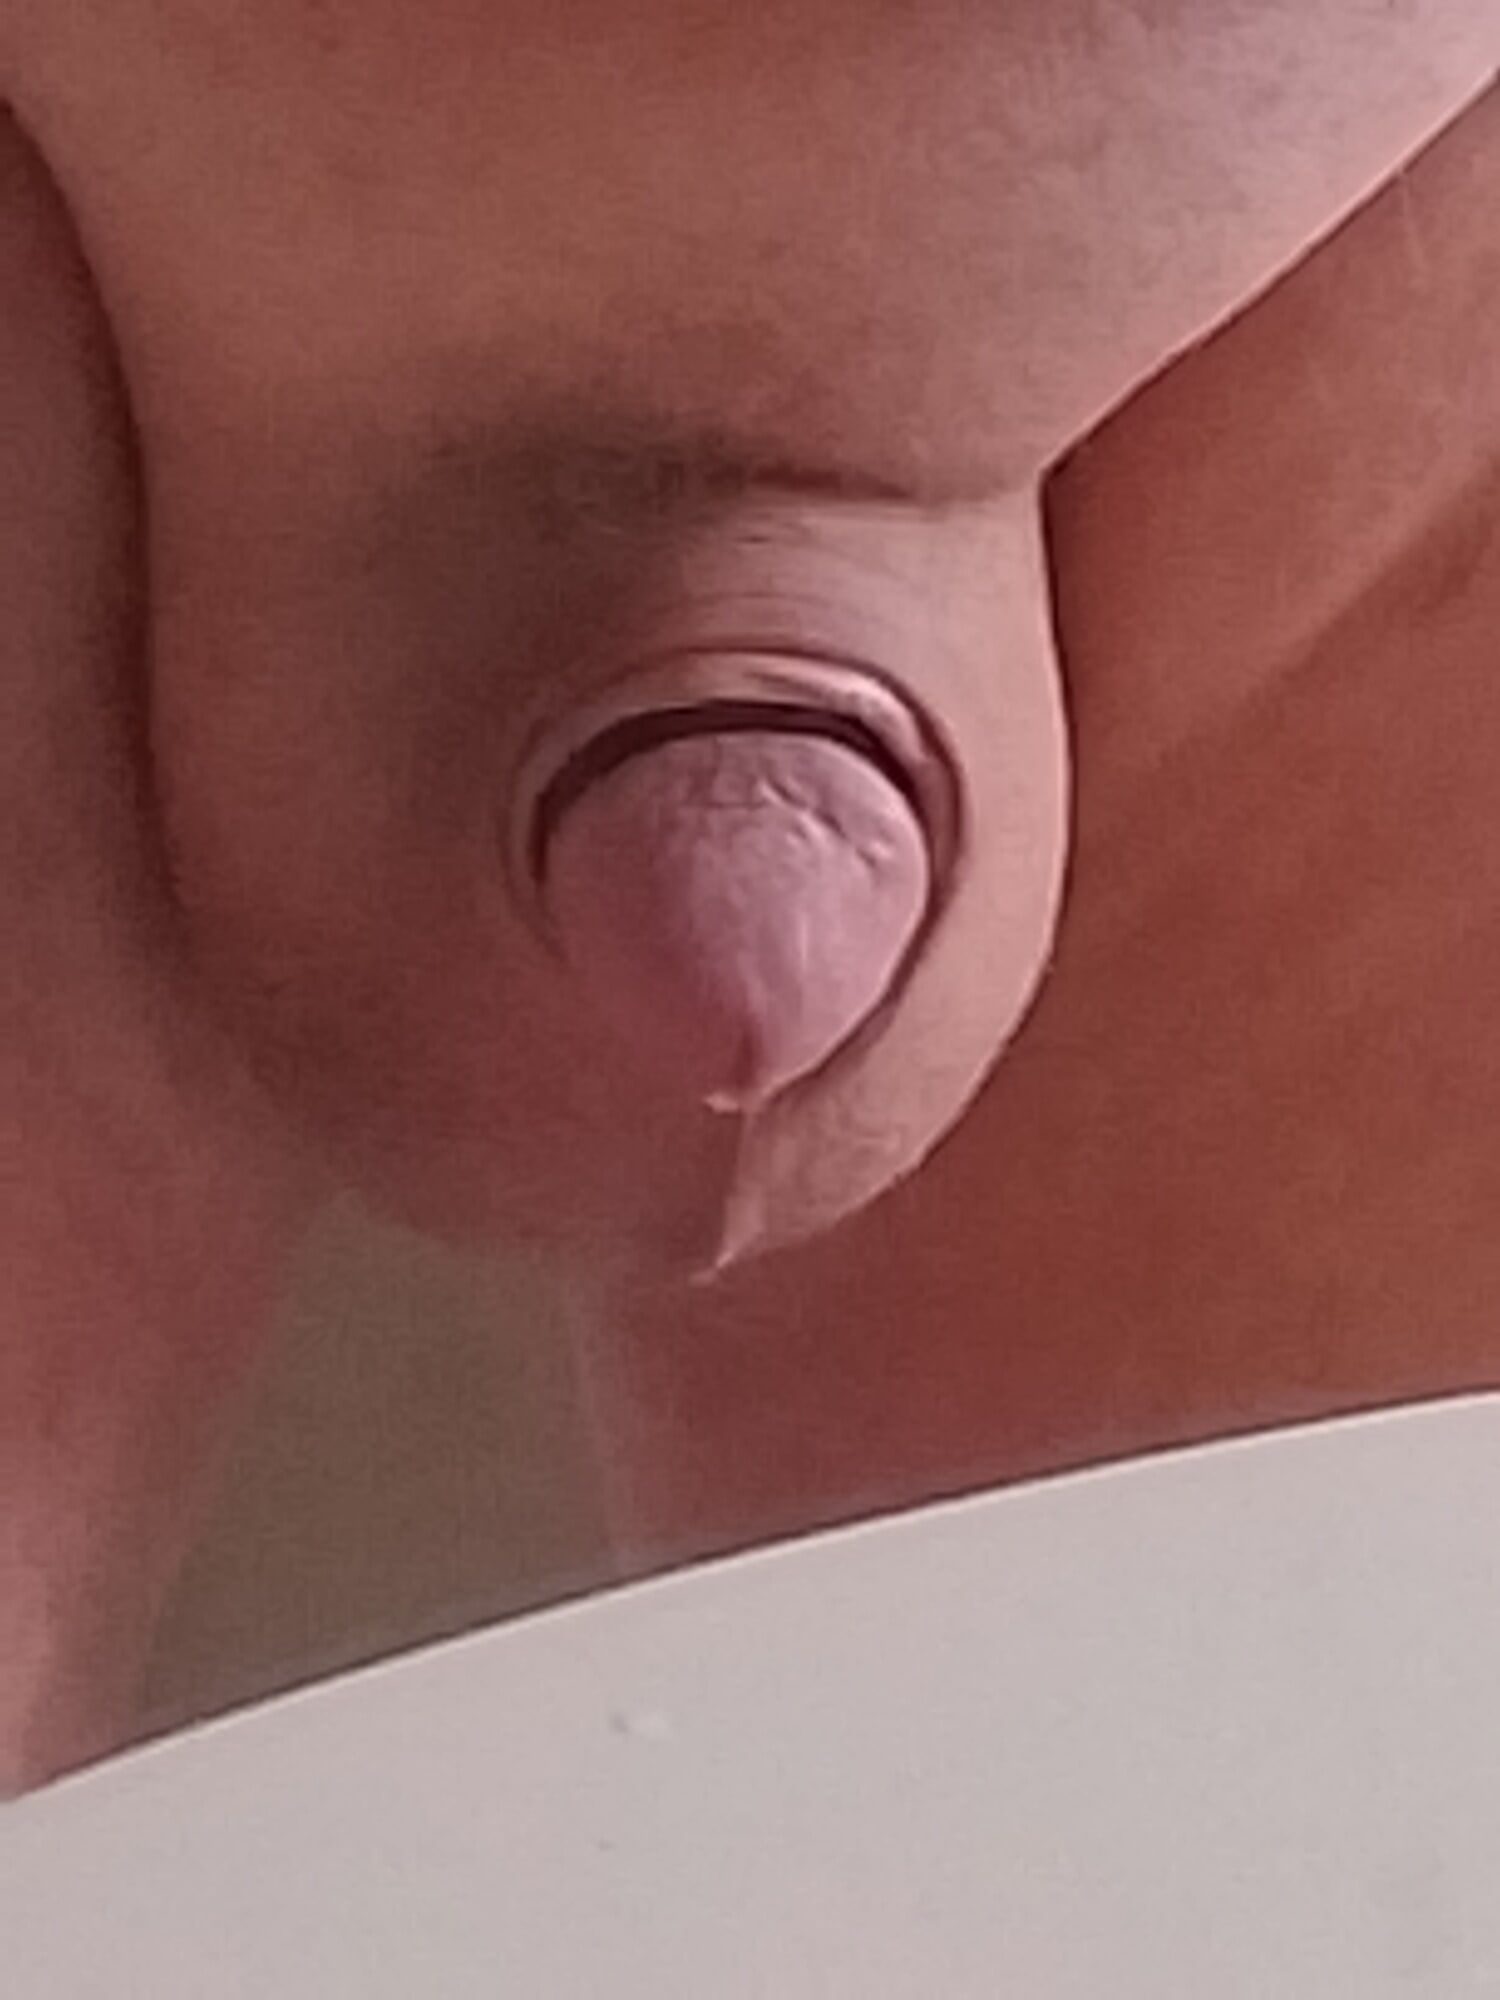 Exposed clitty dripping #2